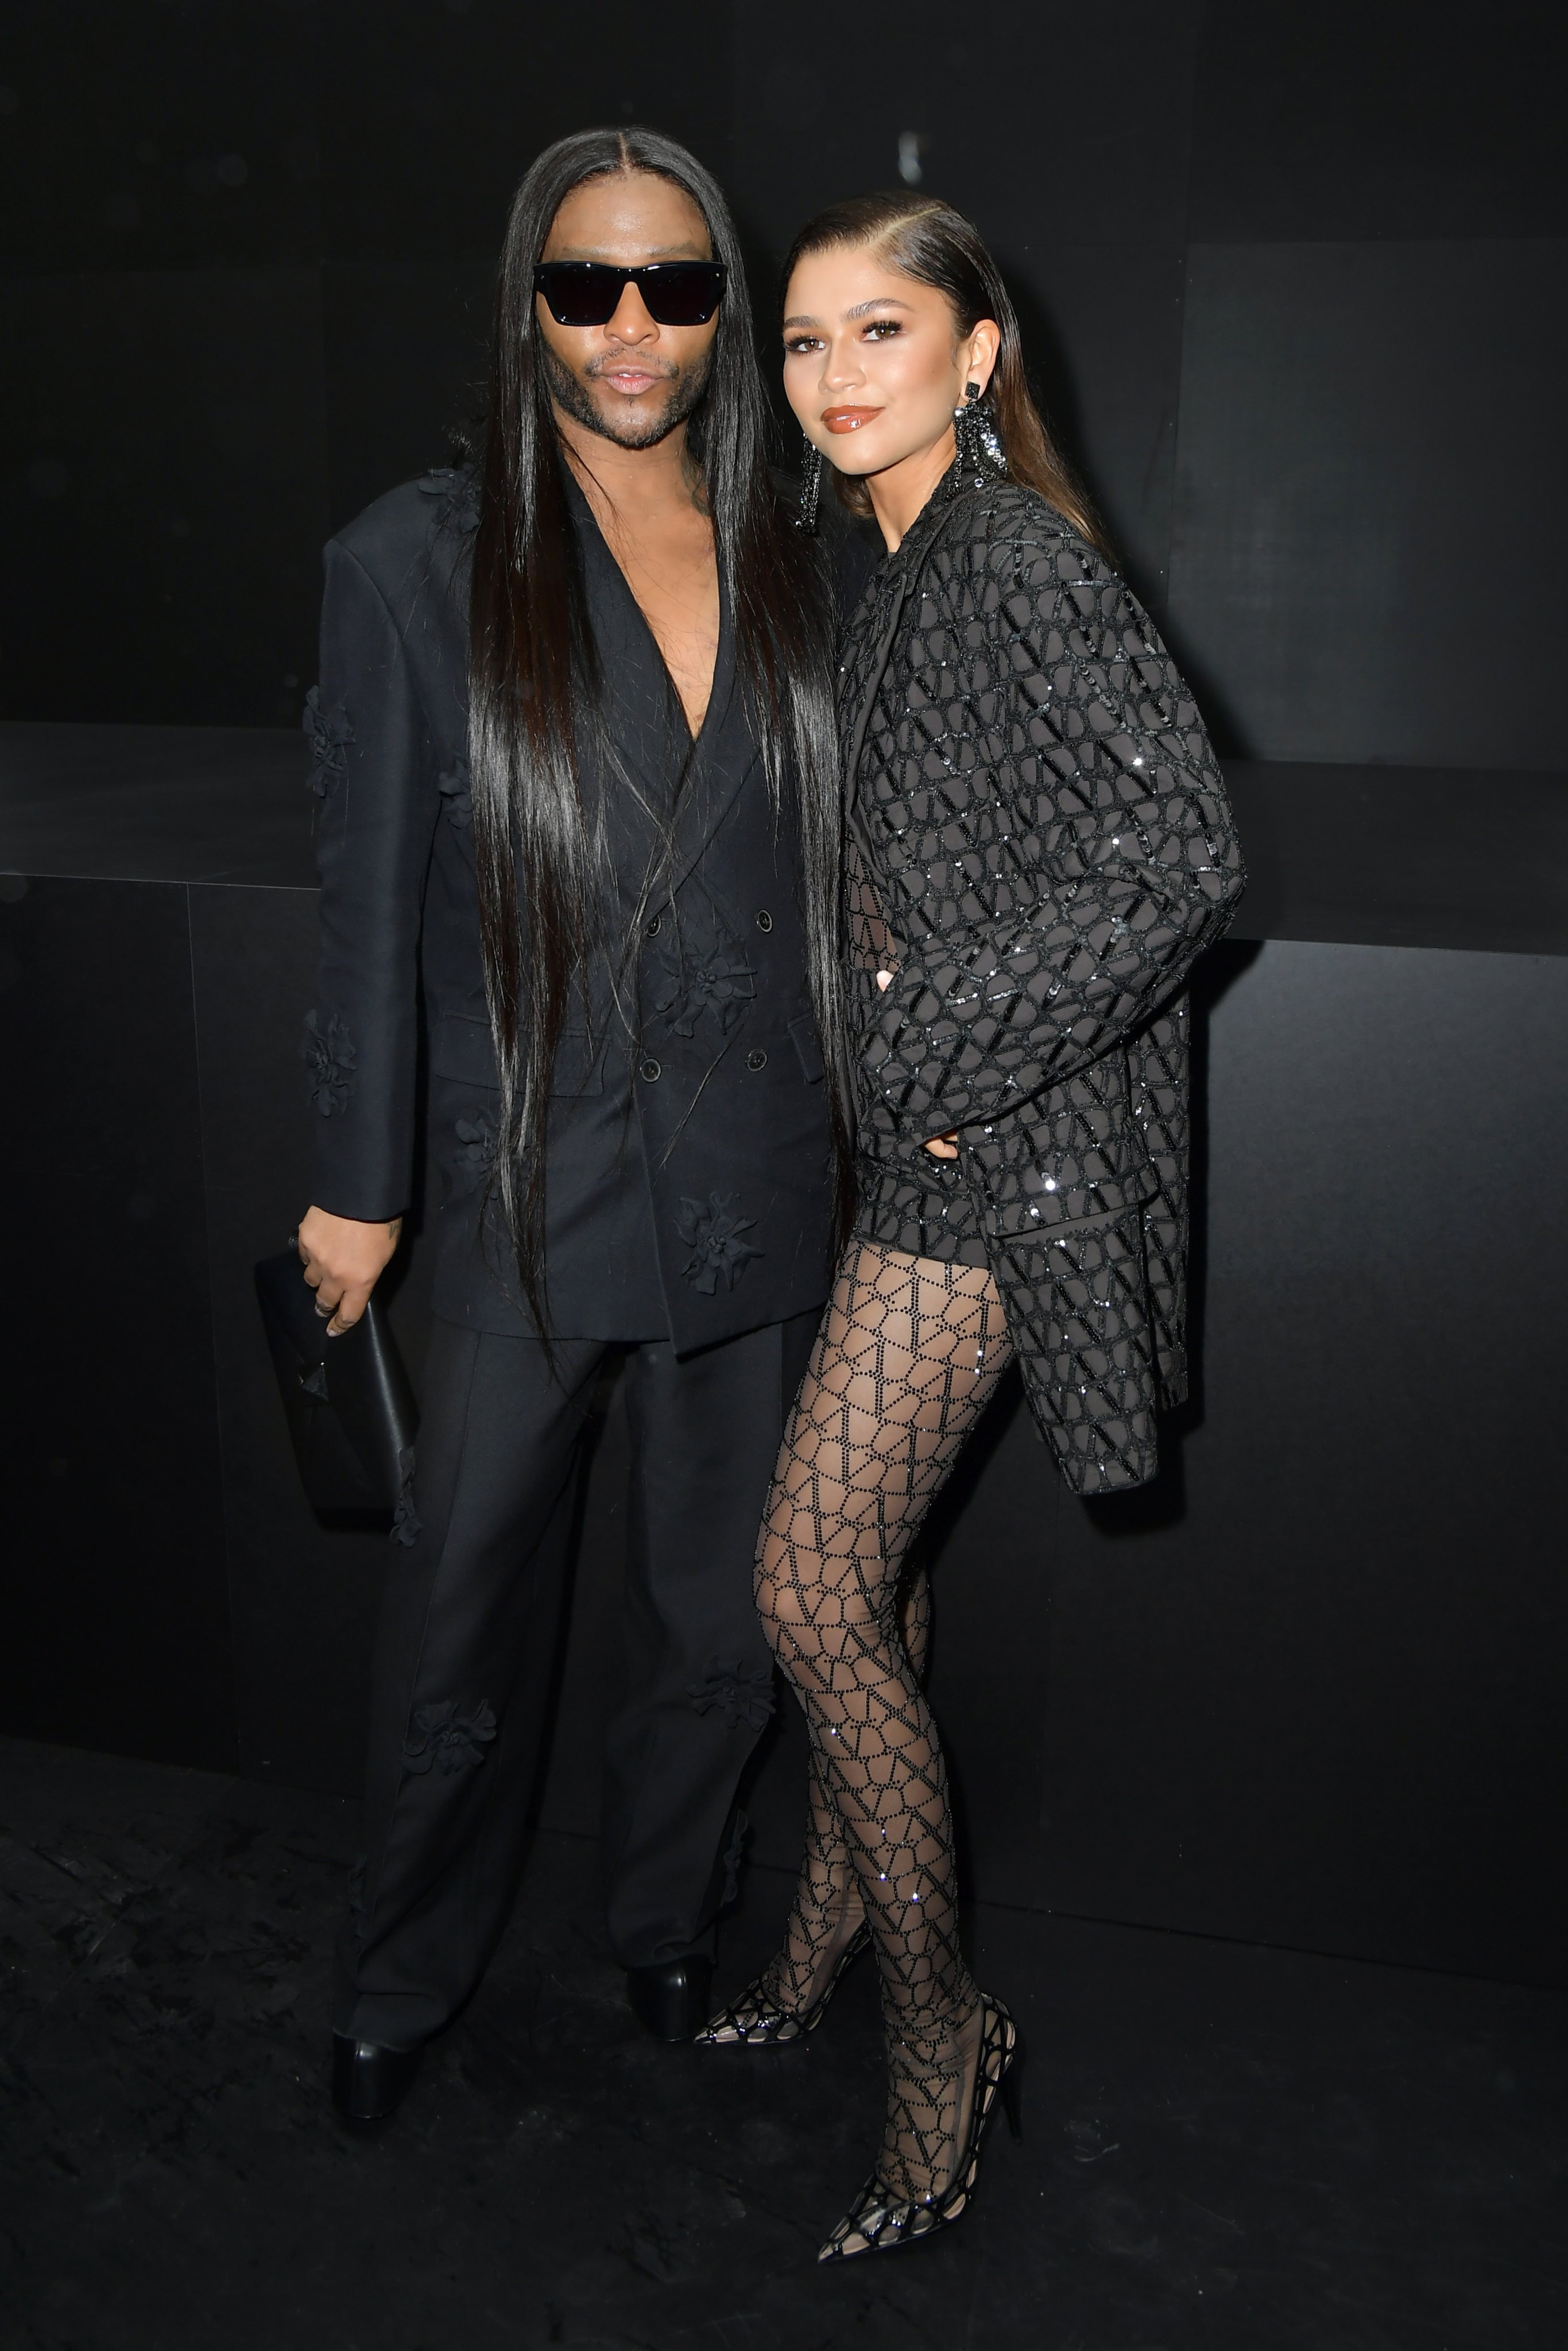 Law Roach and Zendaya attend the Valentino womenswear spring/summer 2023 show as part of Paris Fashion Week in October 2022, in Paris, France. Photo: WireImage